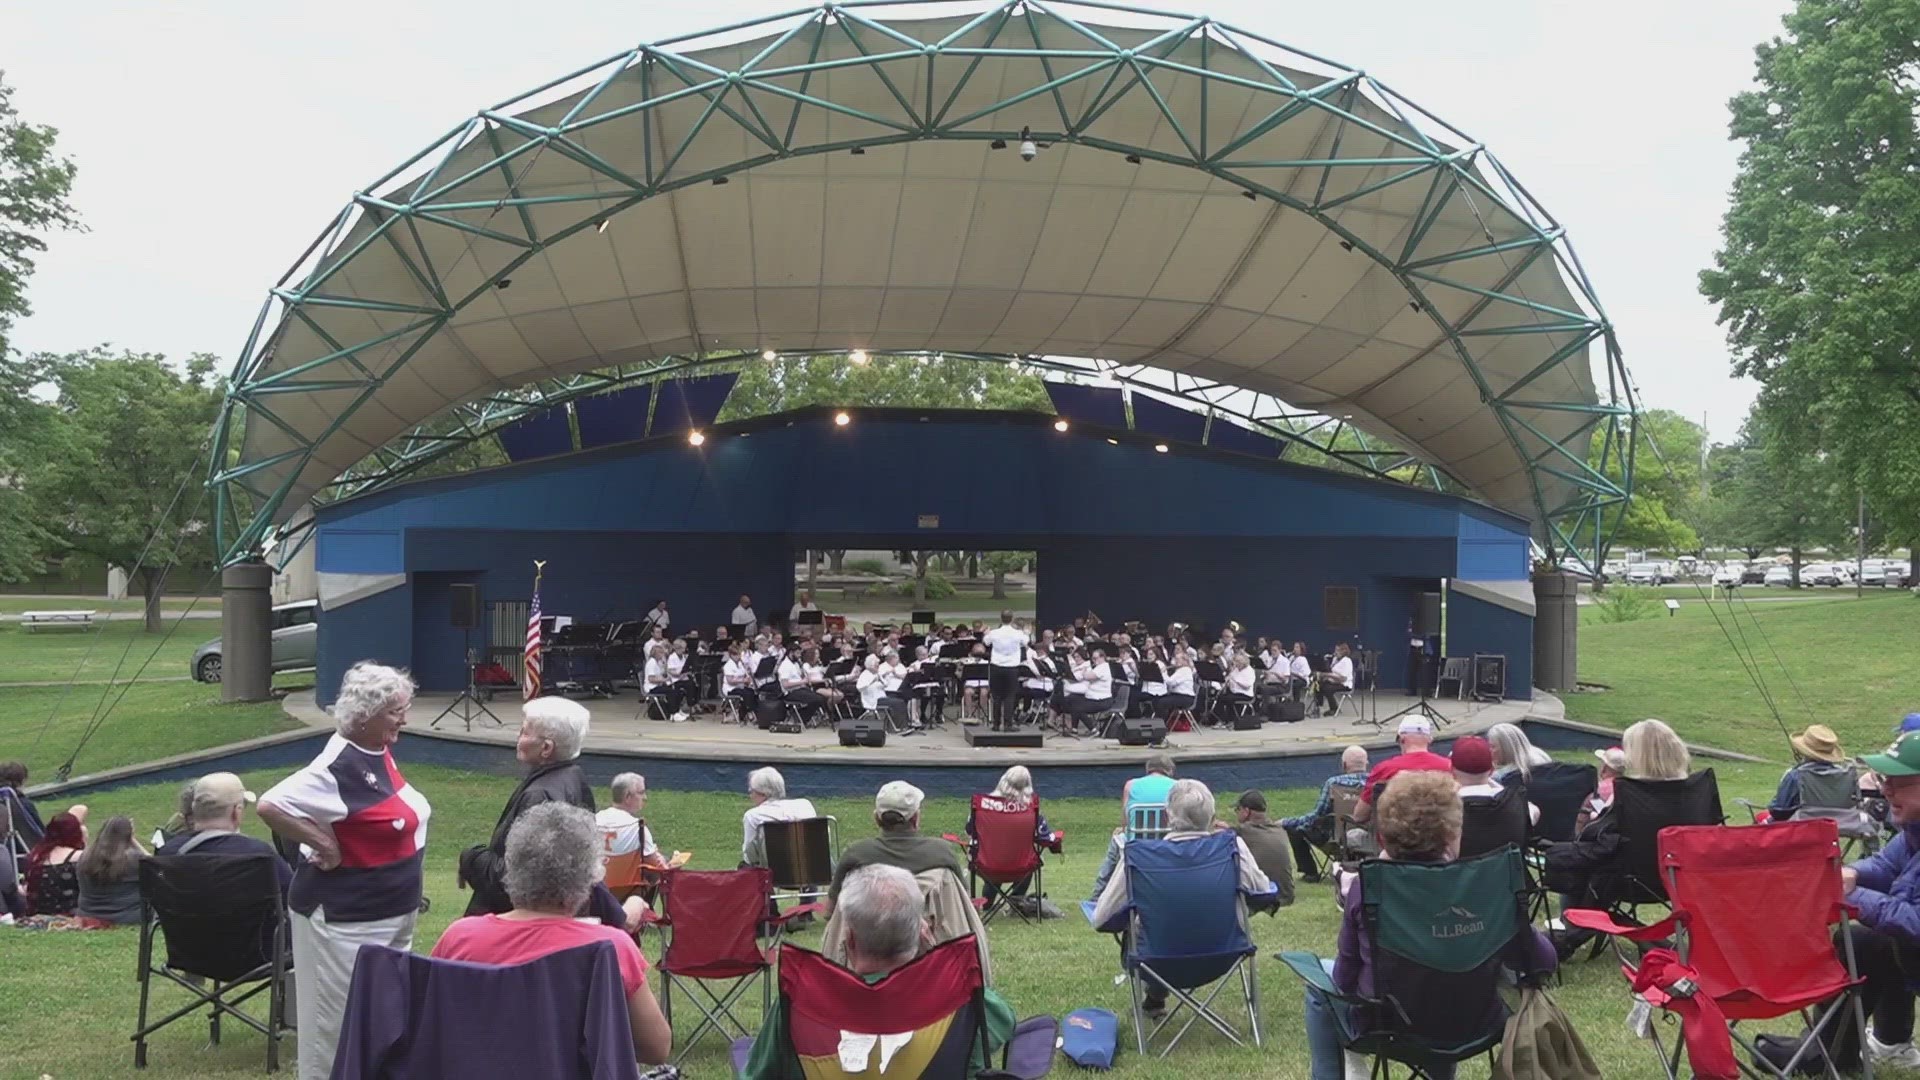 The Oak Ridge Community Band's performance included classical songs, contemporary hits and anthems for Memorial Day.